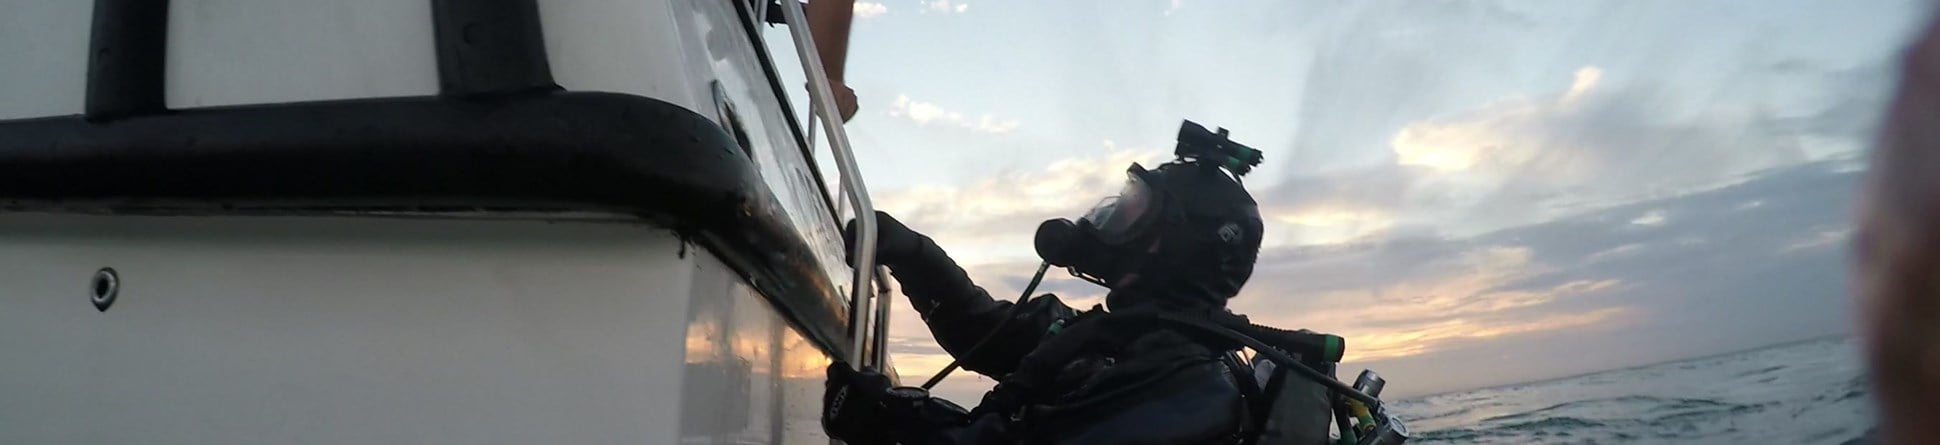 A diver wearing SCUBA equipment prepares to climb up a ladder from a boat following a dive.